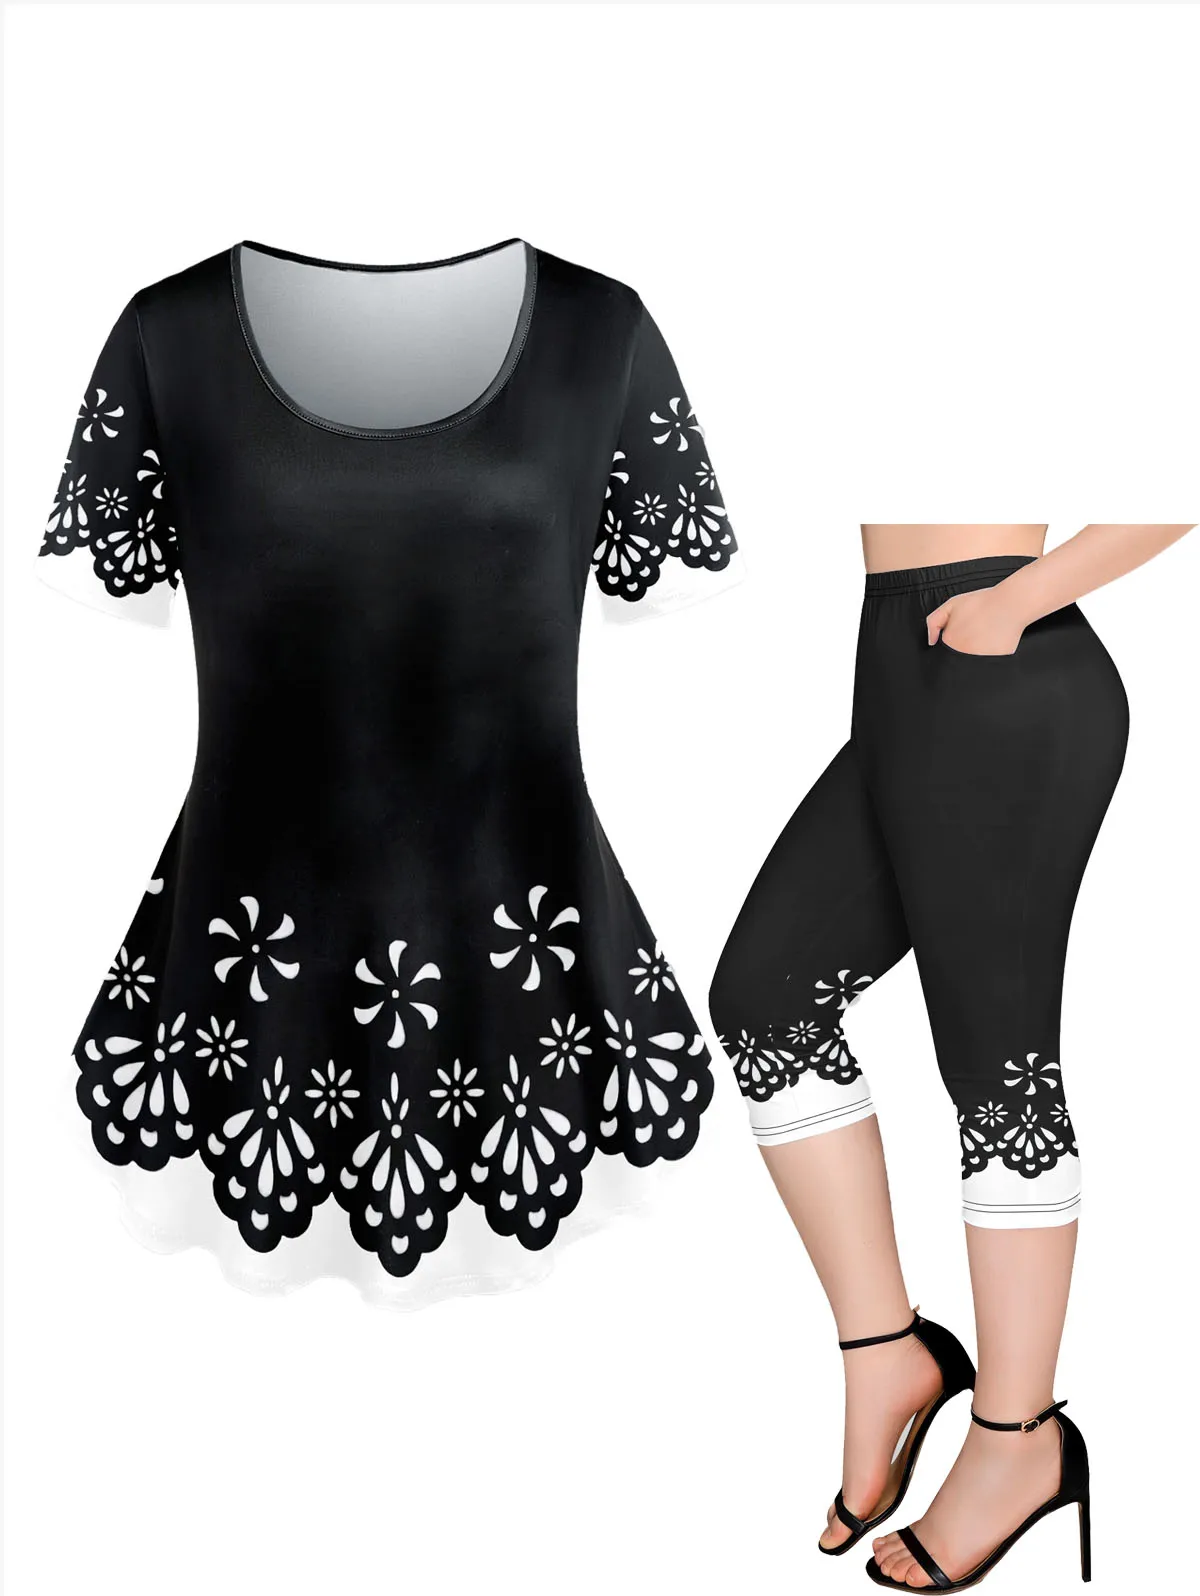 

Plus Size Short Sleeves T-shirt Or Pocket Capri Leggings Women's Floral Printed Outfit Spring,Summer Casual Matching Set